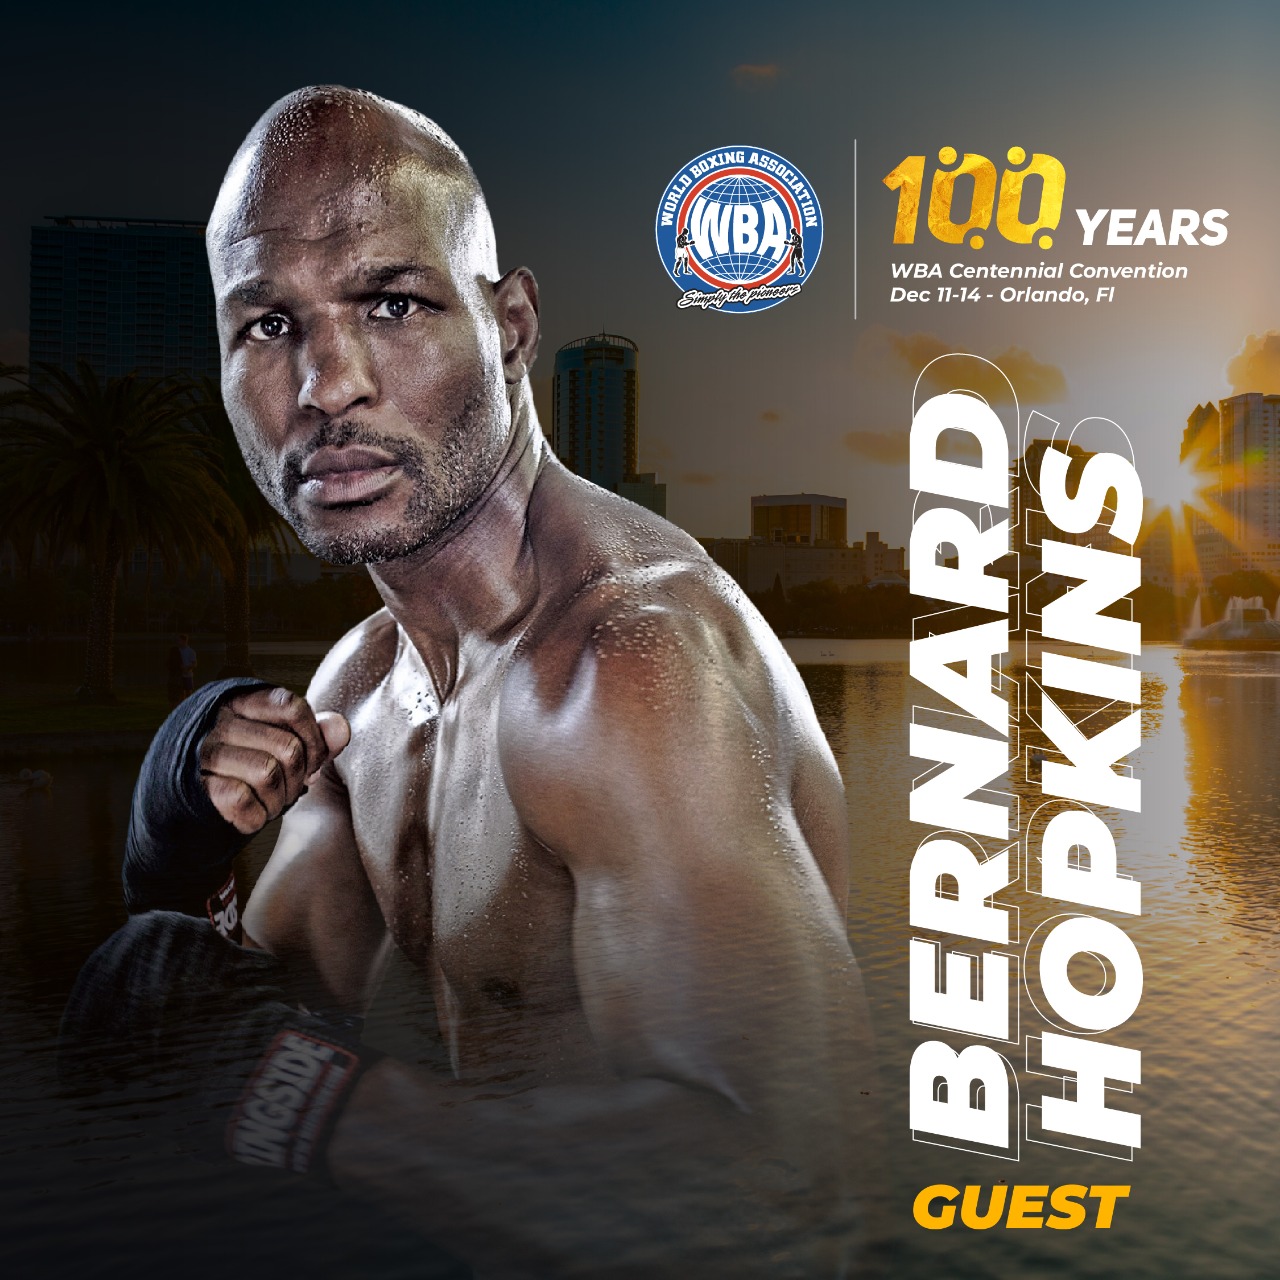 Hopkins will be present at the WBA Centennial Convention